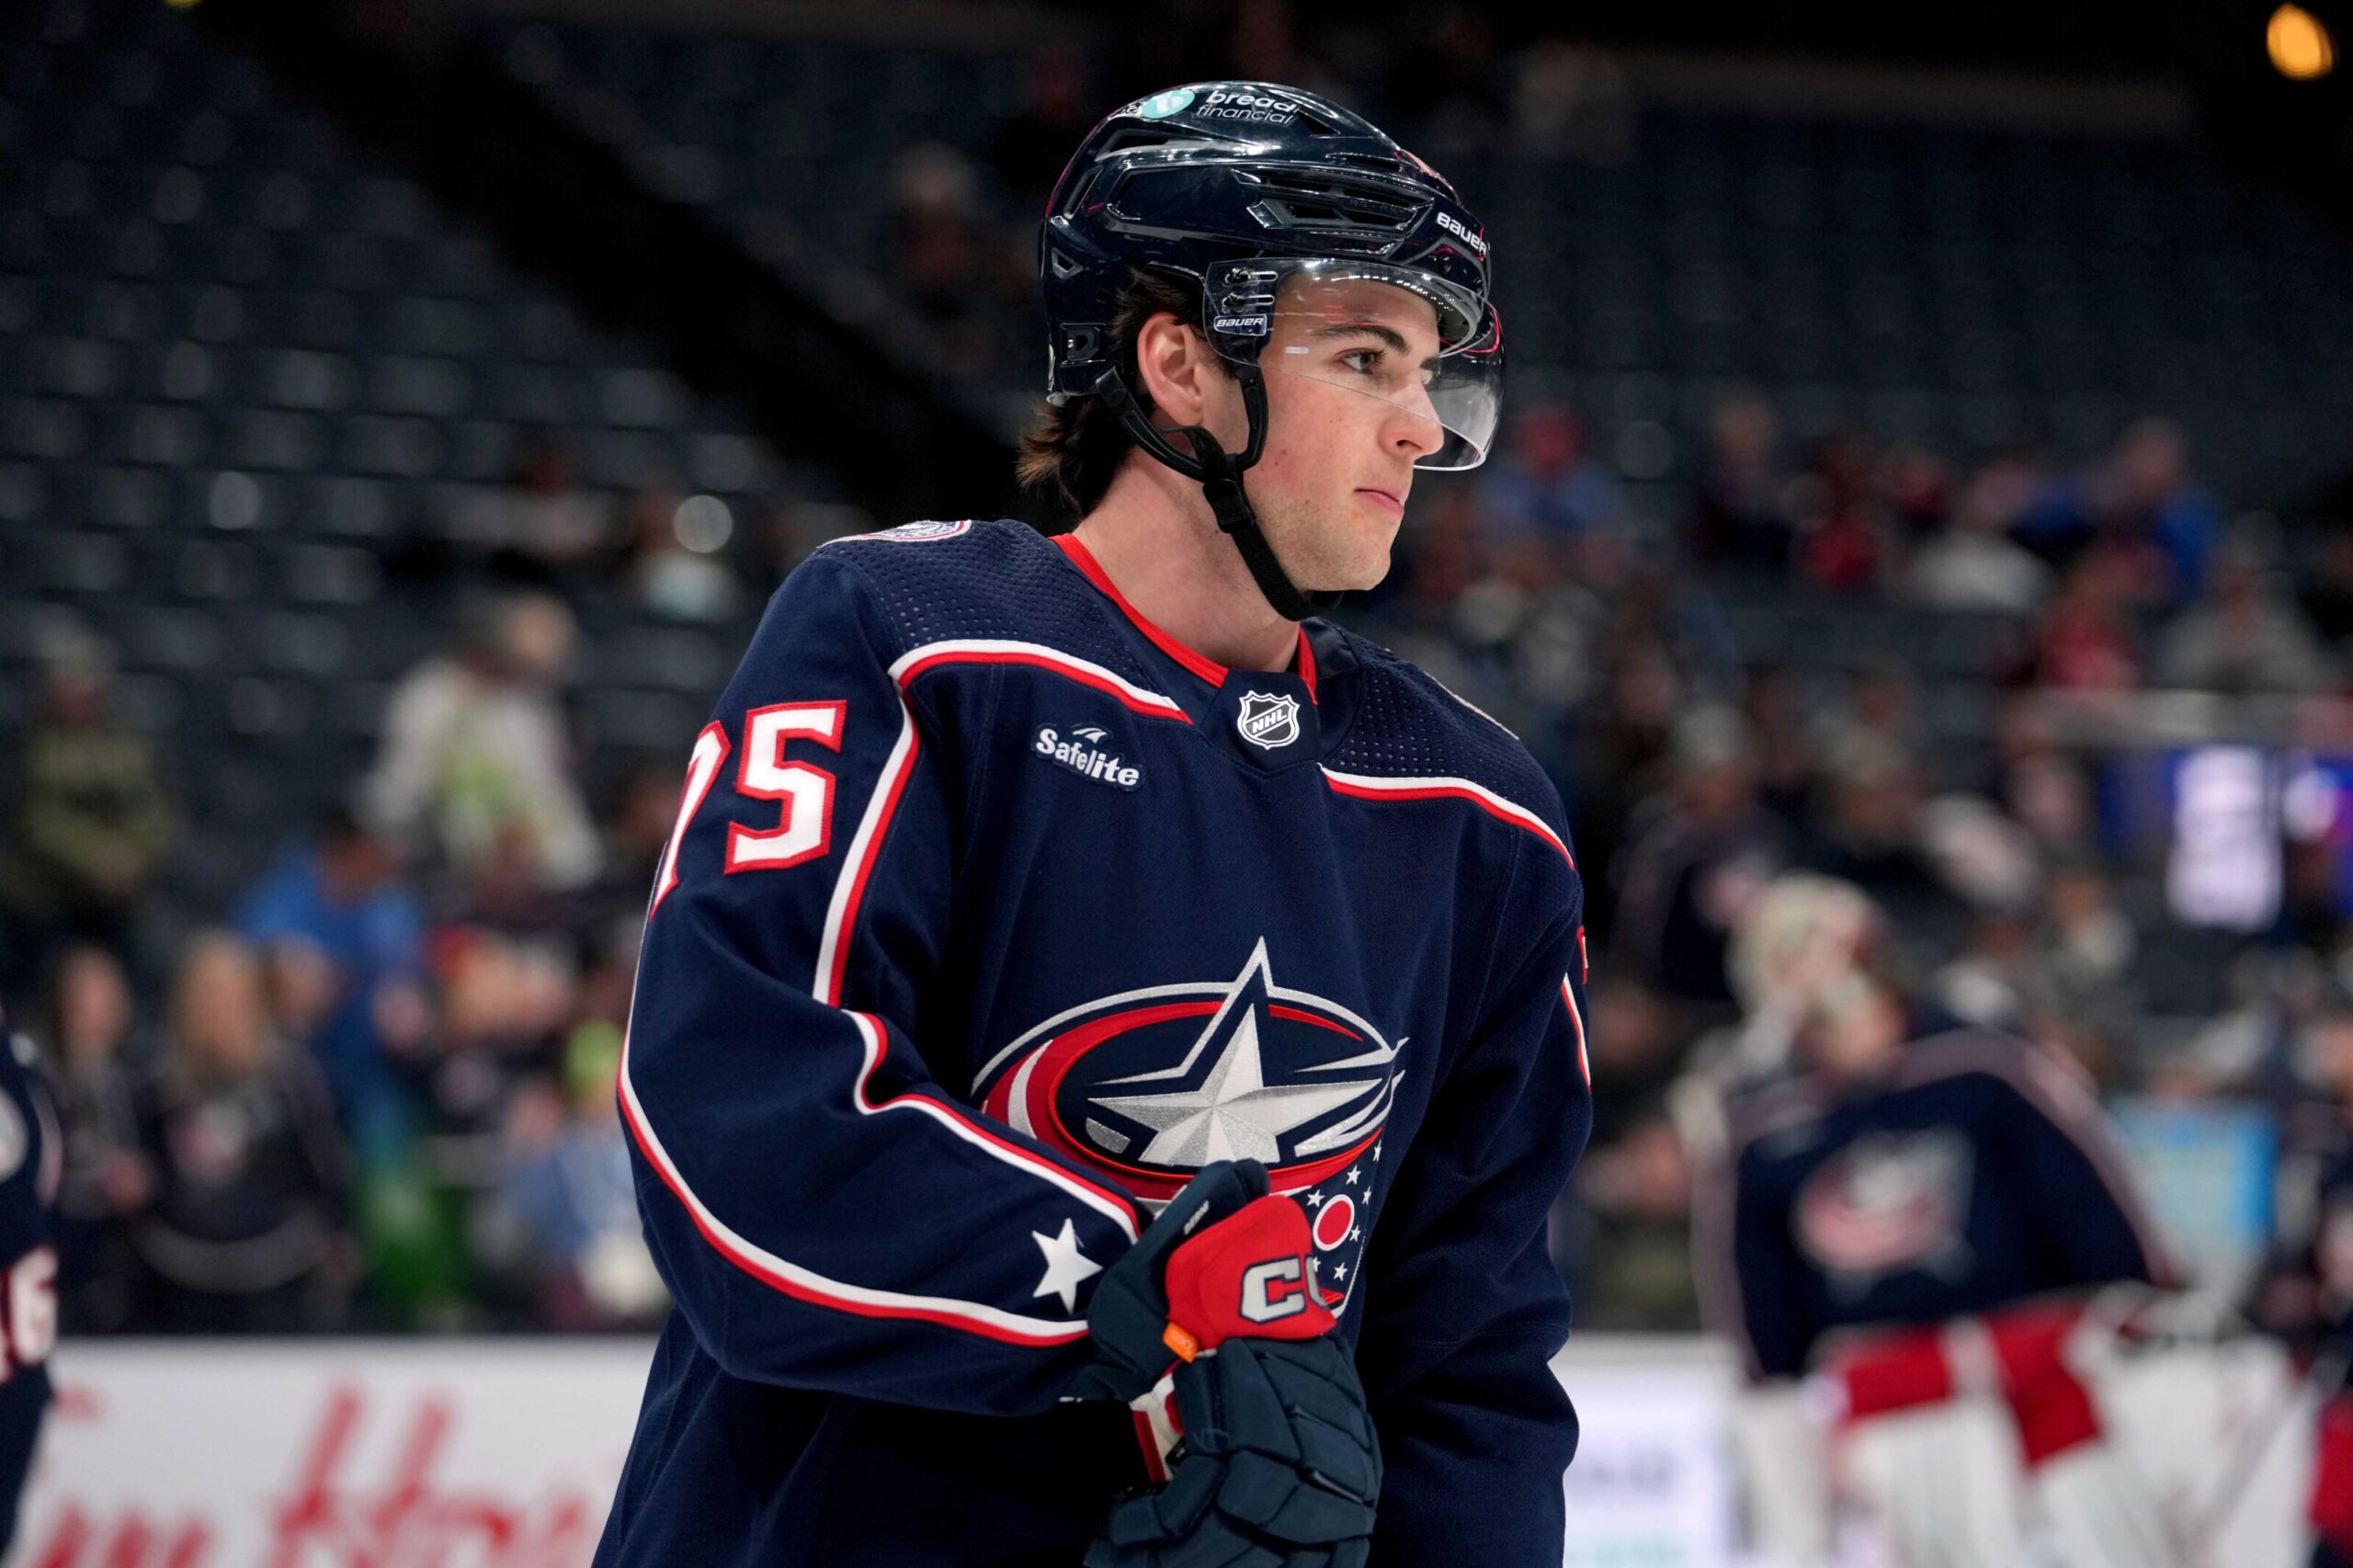 You could own your favorite #CBJ - Columbus Blue Jackets